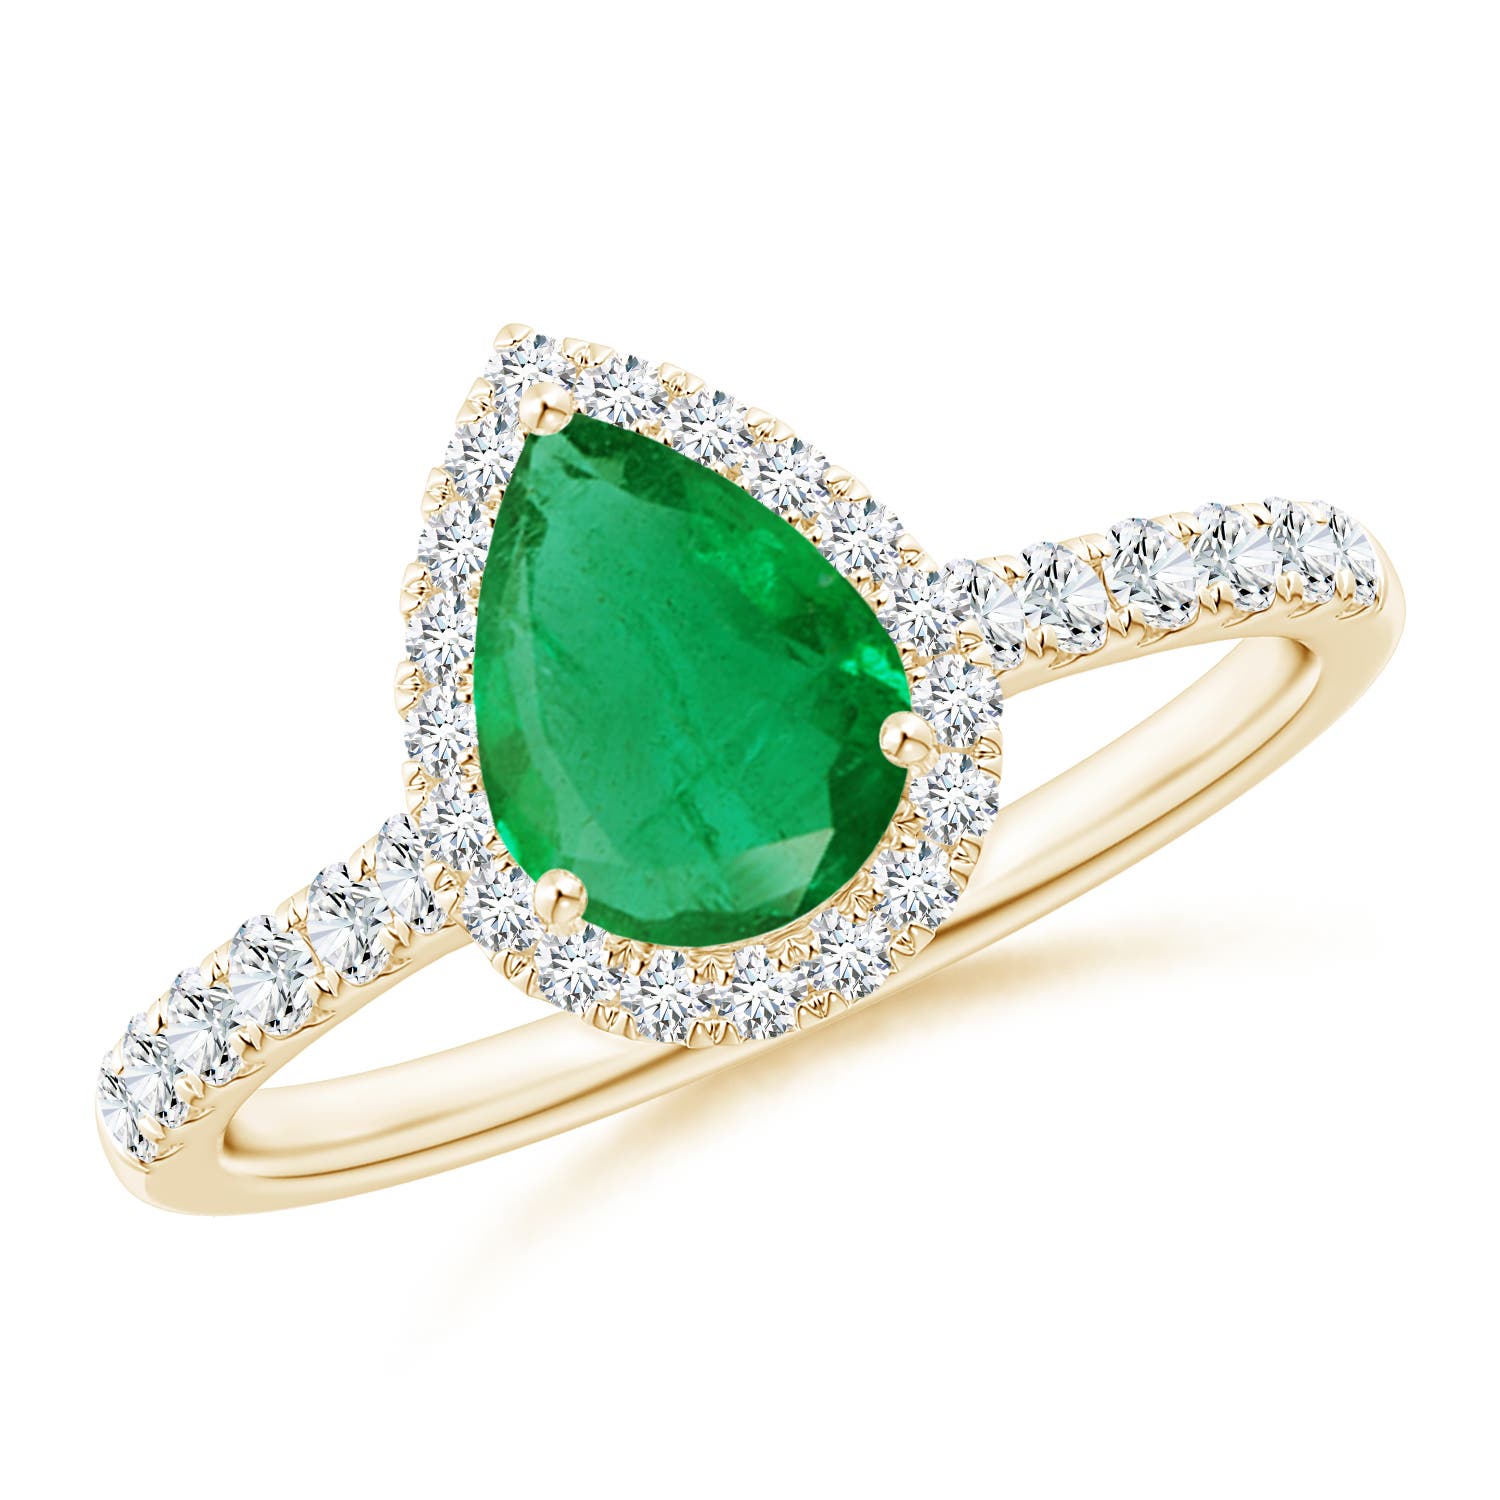 AA - Emerald / 1.32 CT / 14 KT Yellow Gold